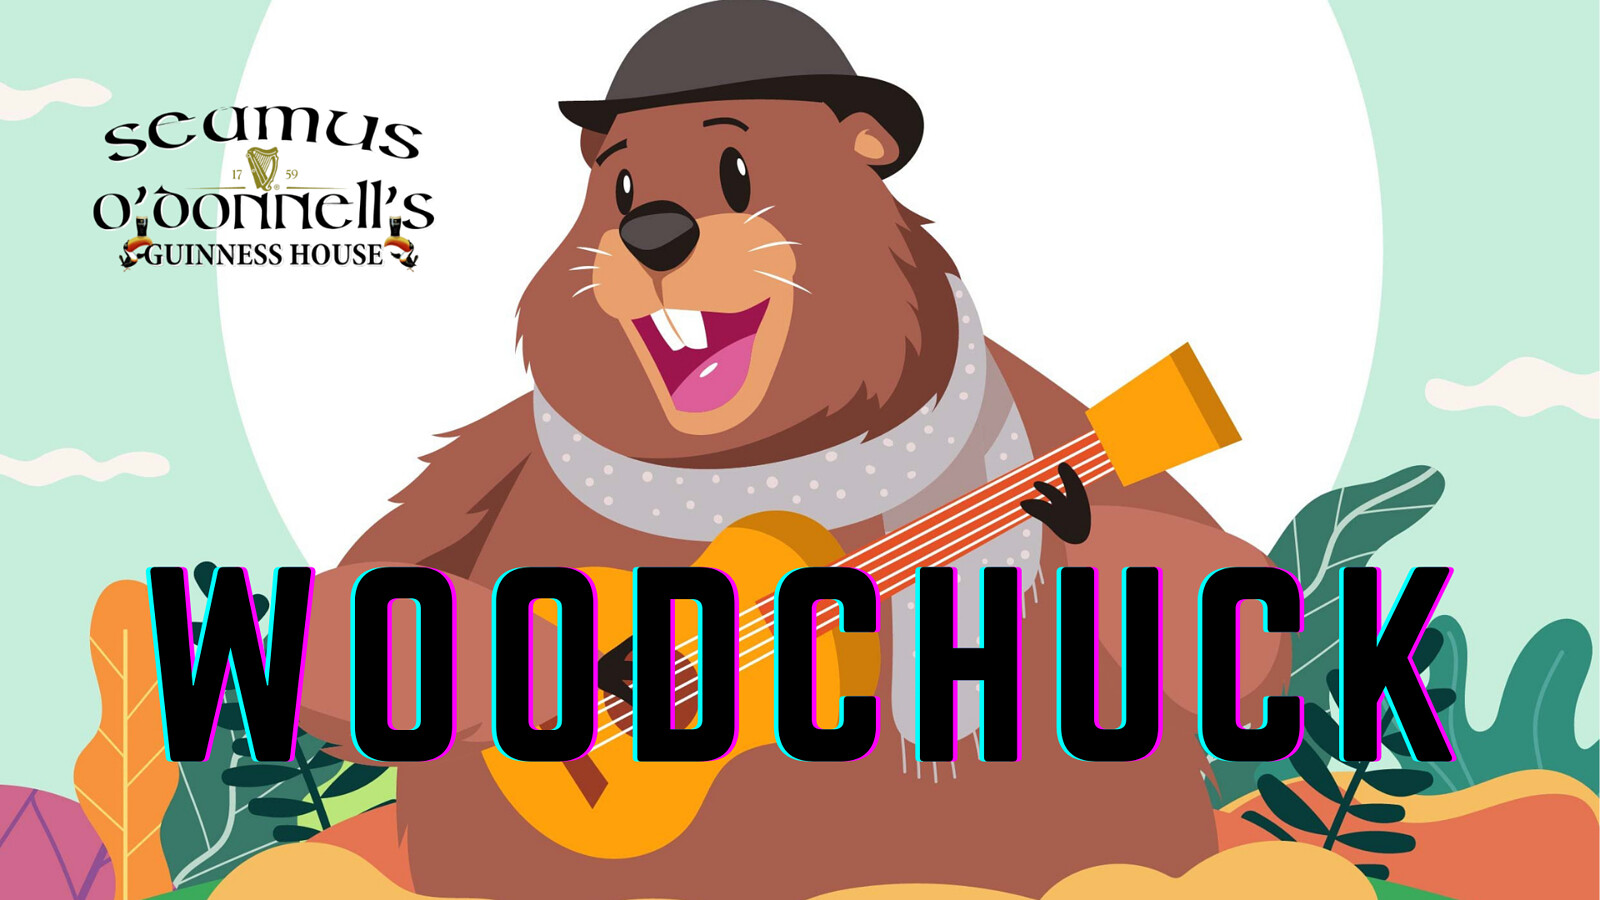 Woodchuck at Seamus O'Donnell's